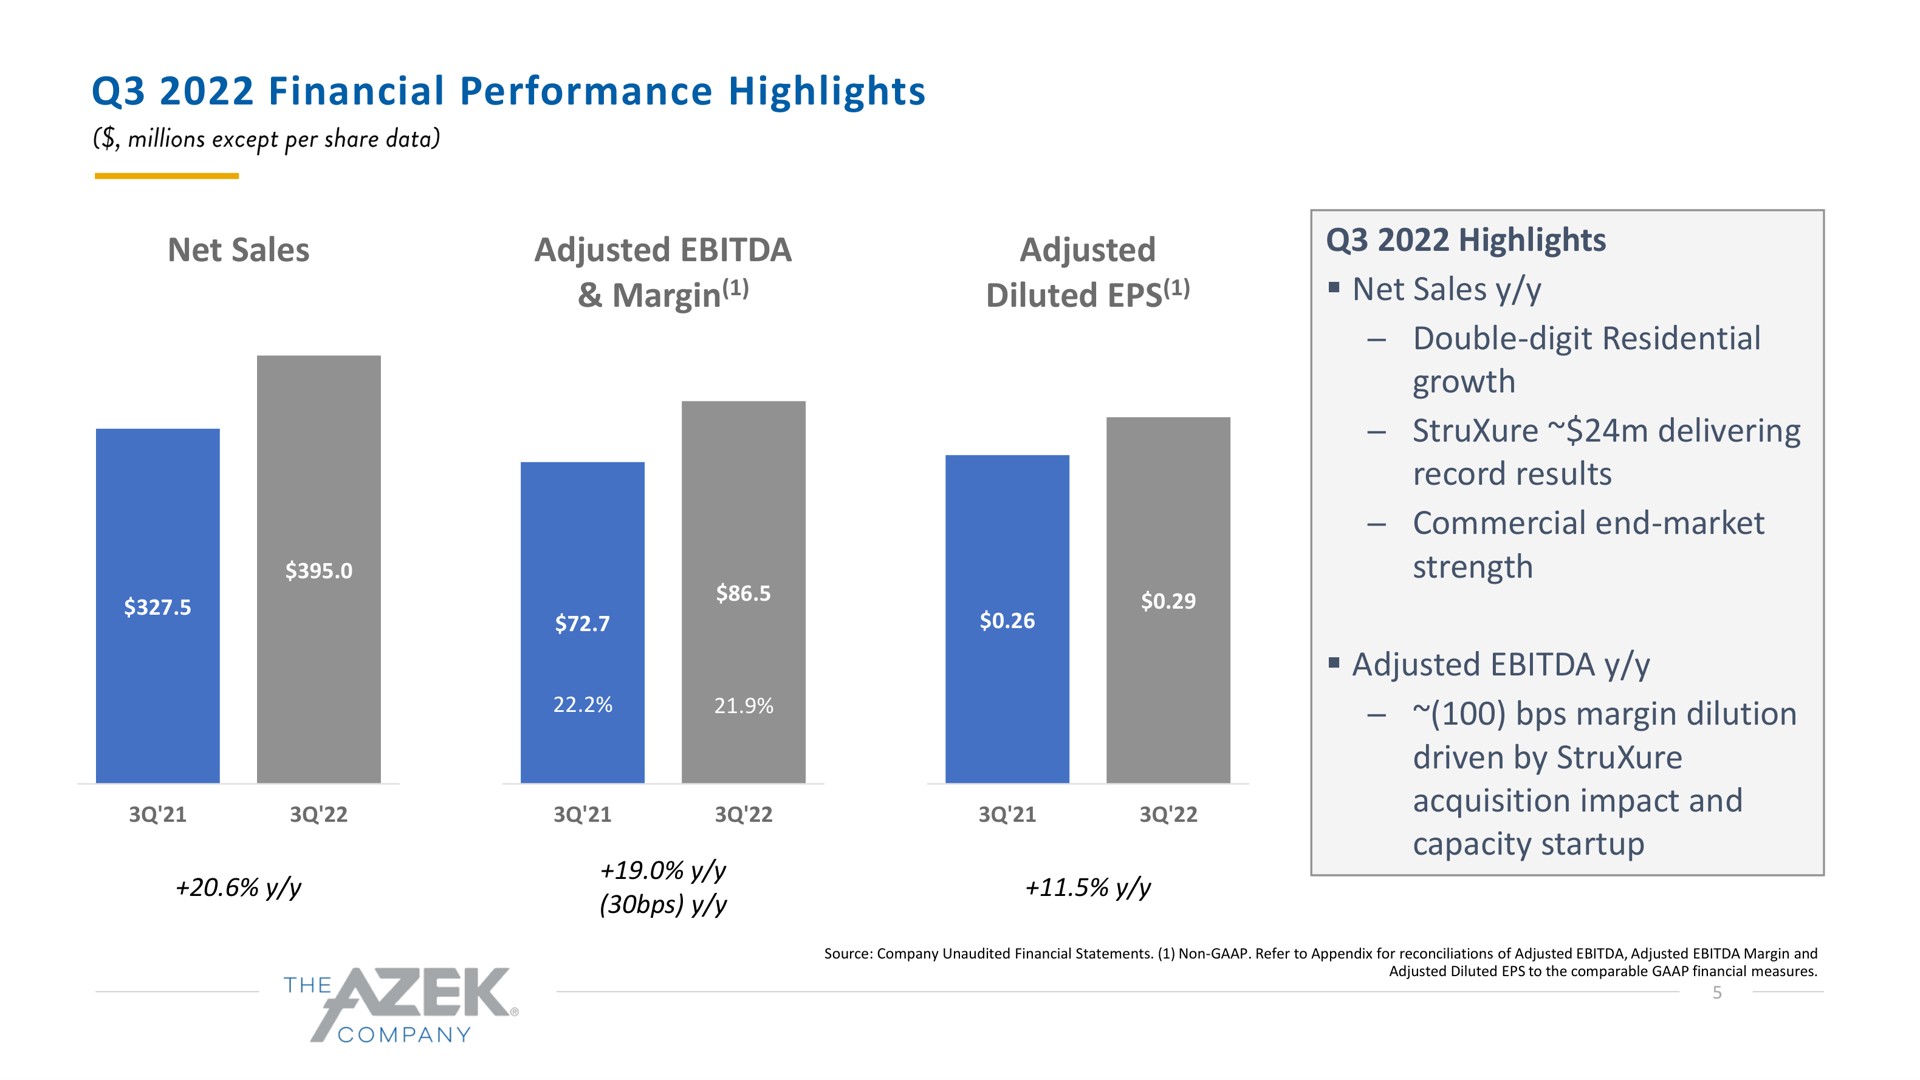 financial performance highlights net sales adjusted margin adjusted diluted highlights net sales double digit residential growth delivering record results commercial end market strength adjusted margin dilution driven by acquisition impact and capacity | Azek